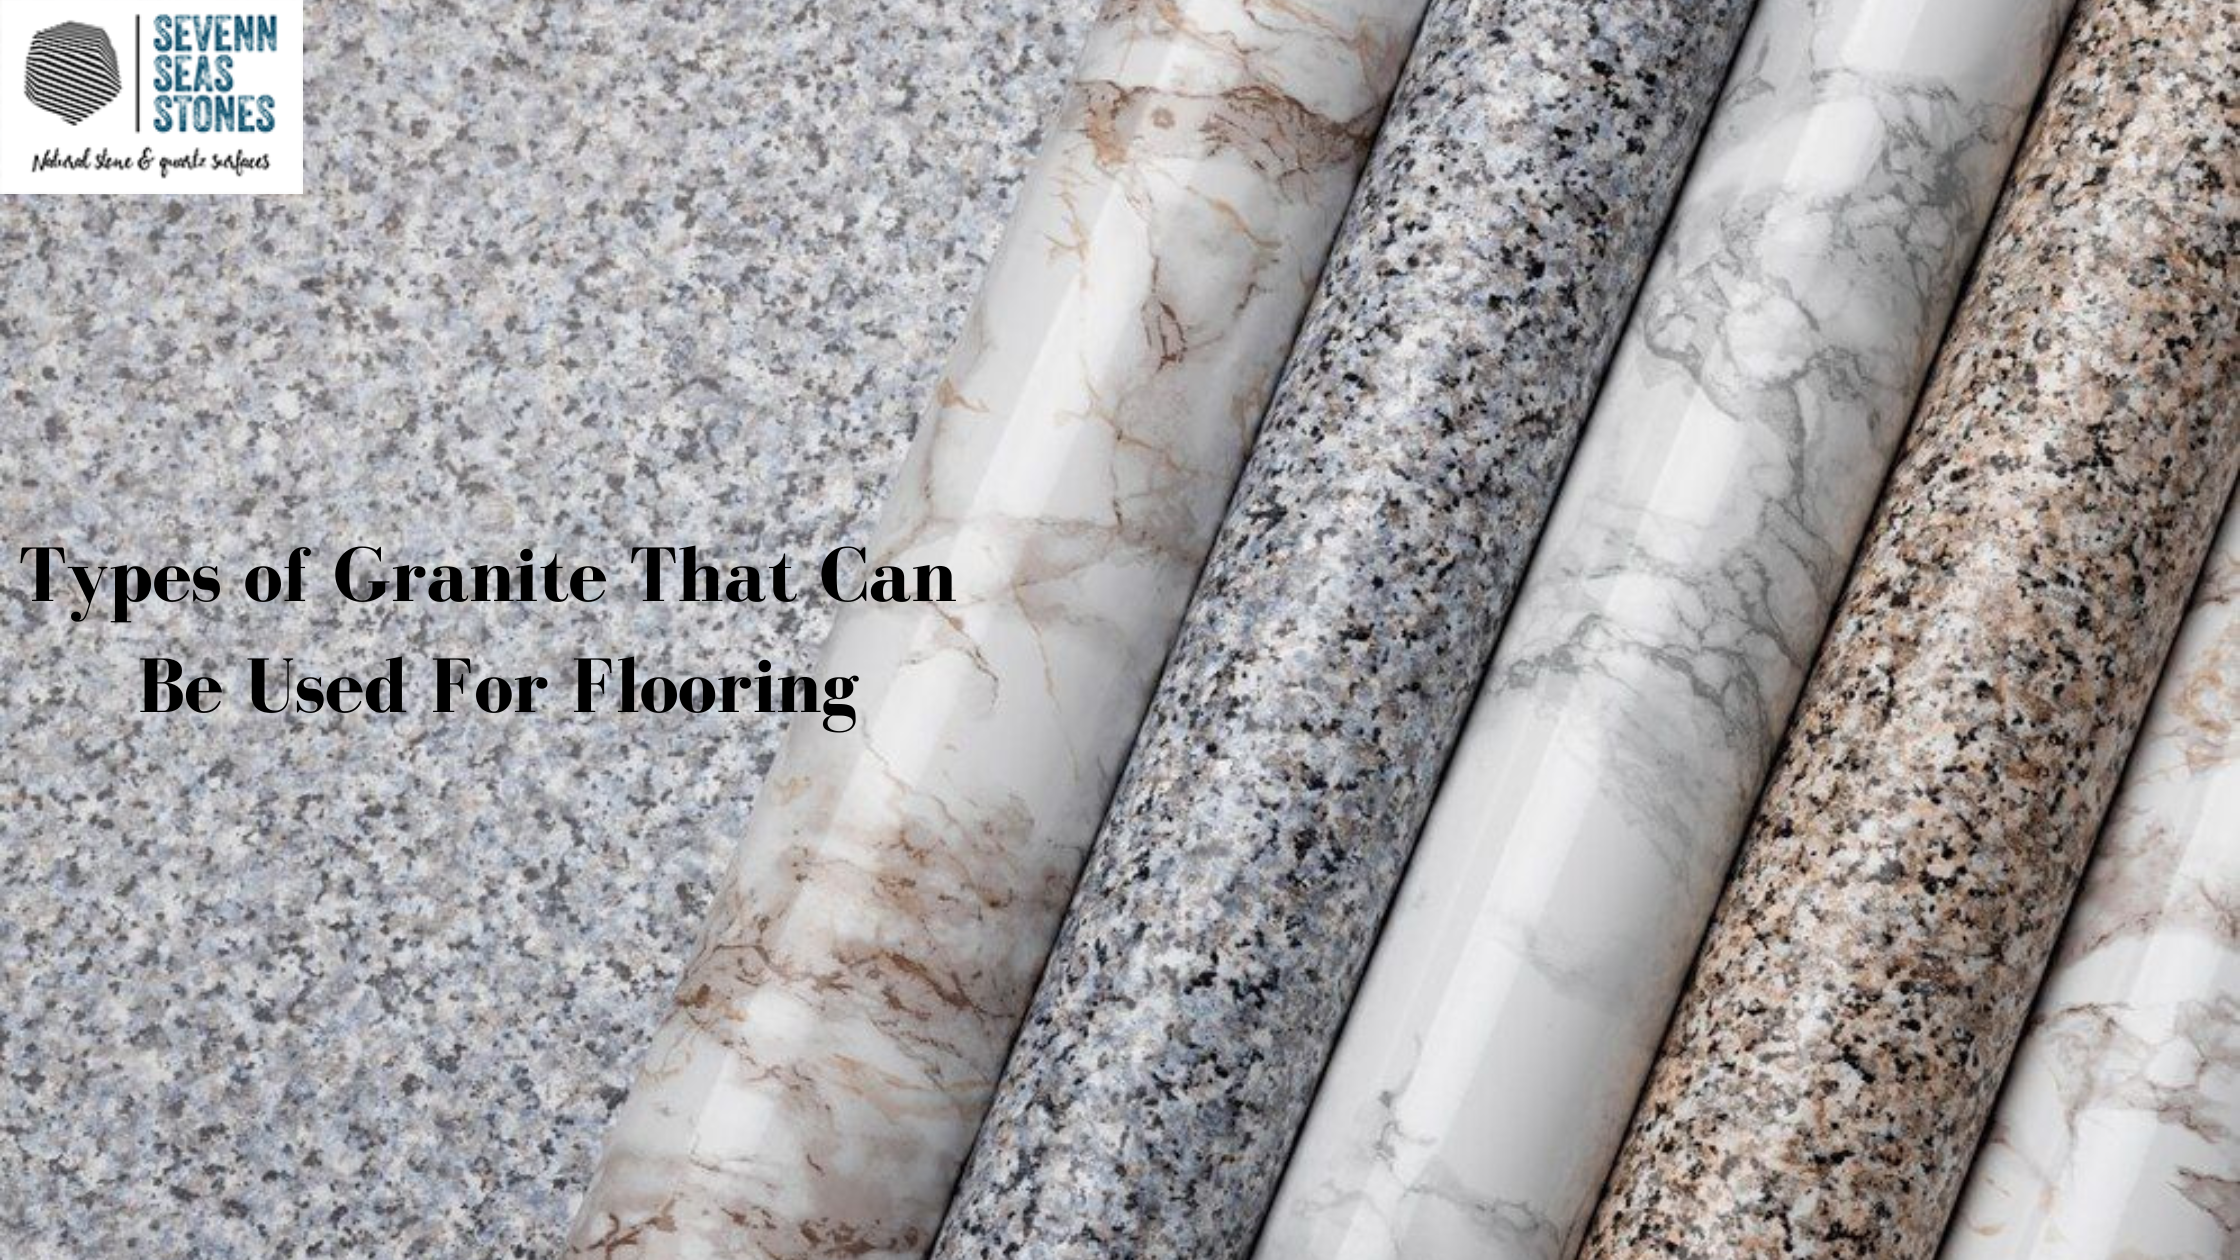 blog-What Are The Different Types Of Granite That Can Be Used For Flooring?